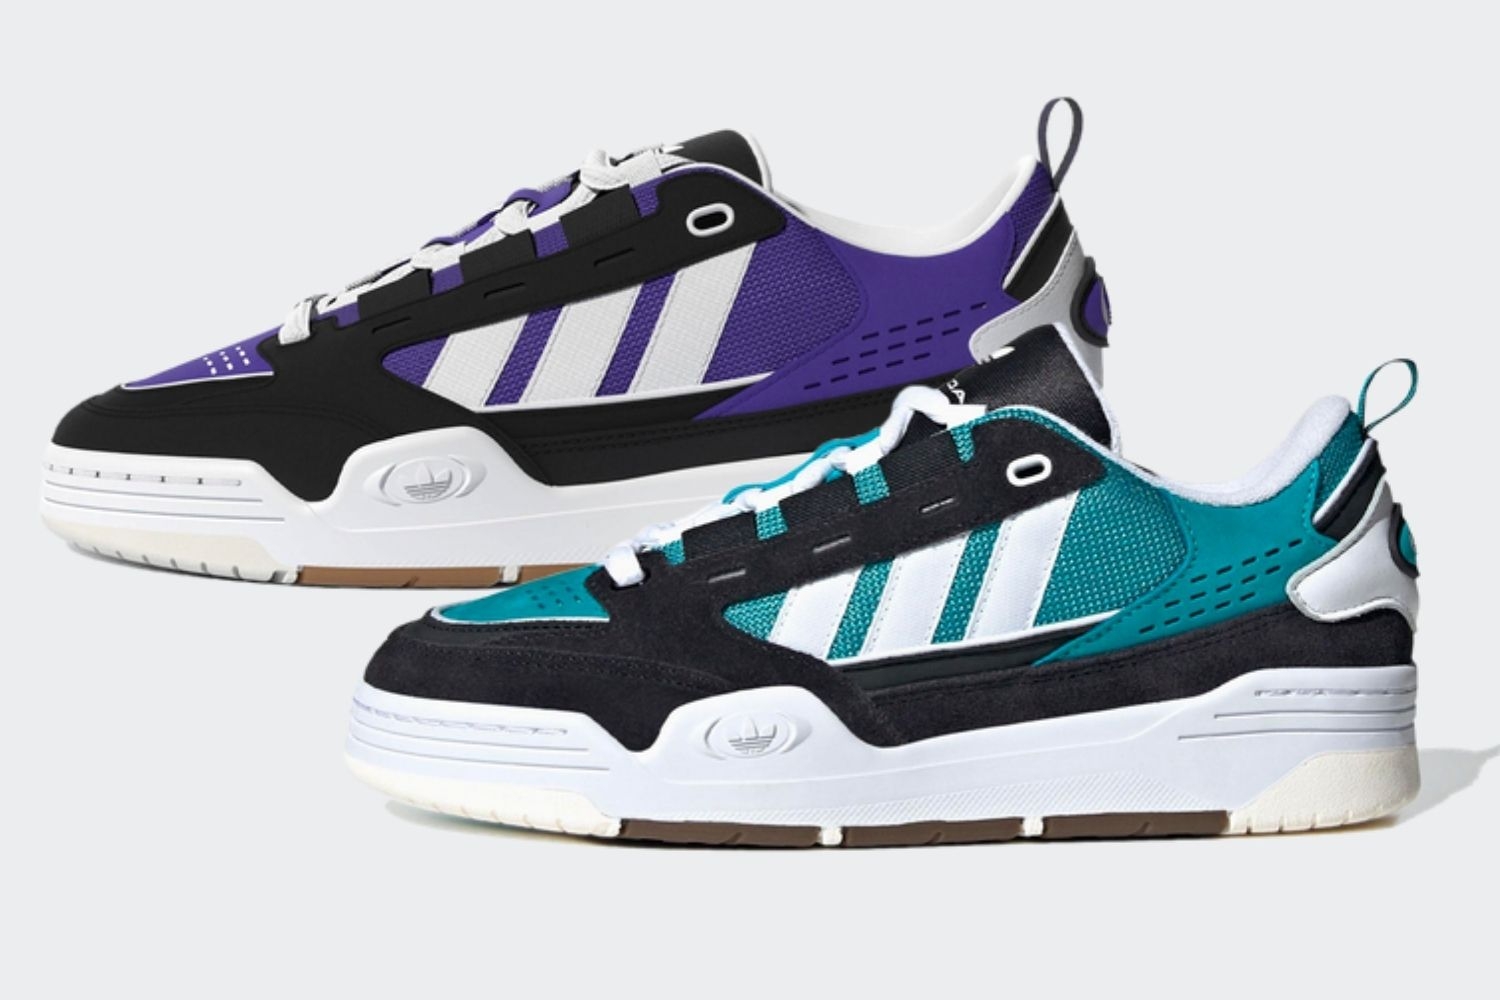 The adidas ADI2000 is inspired by skate shoes from 2000